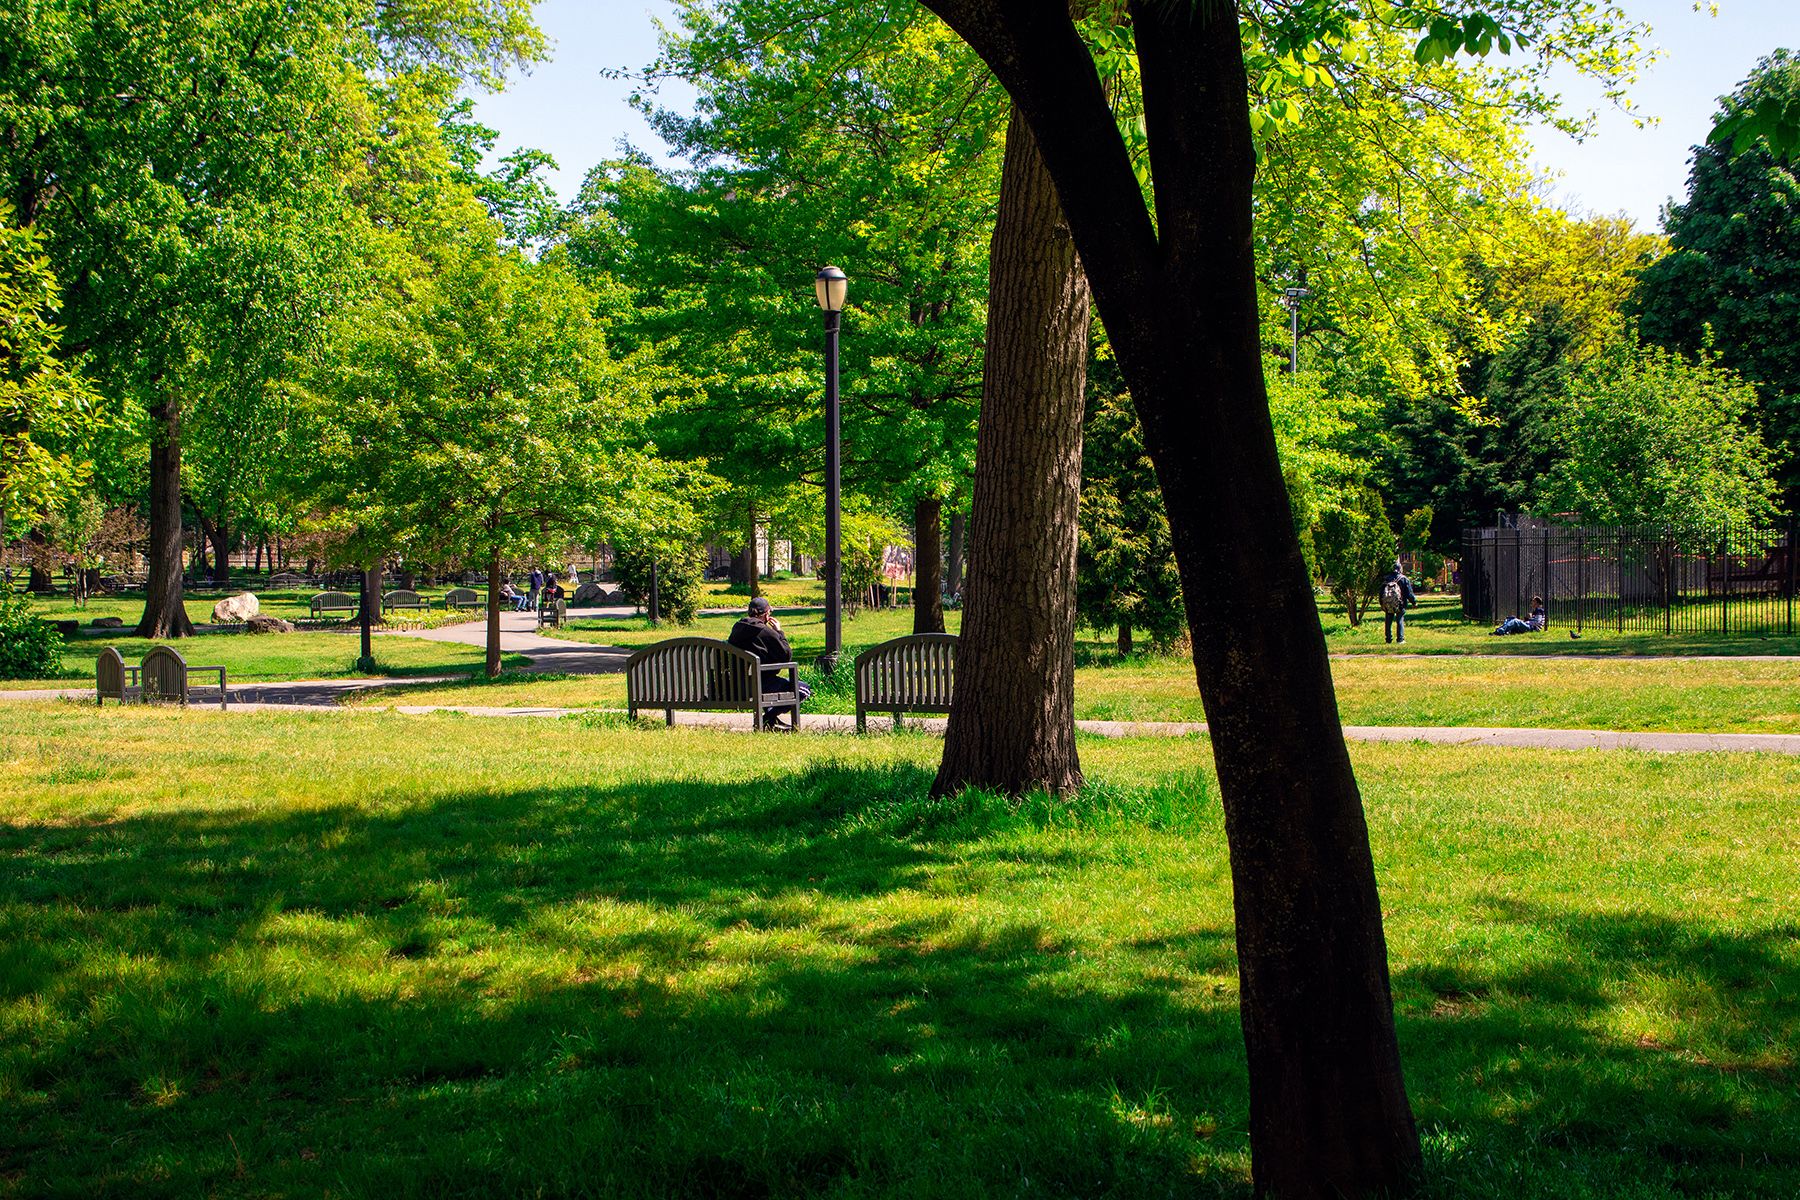 Park on a sunny day with grass, trees, benches and people walking and sitting in the distance